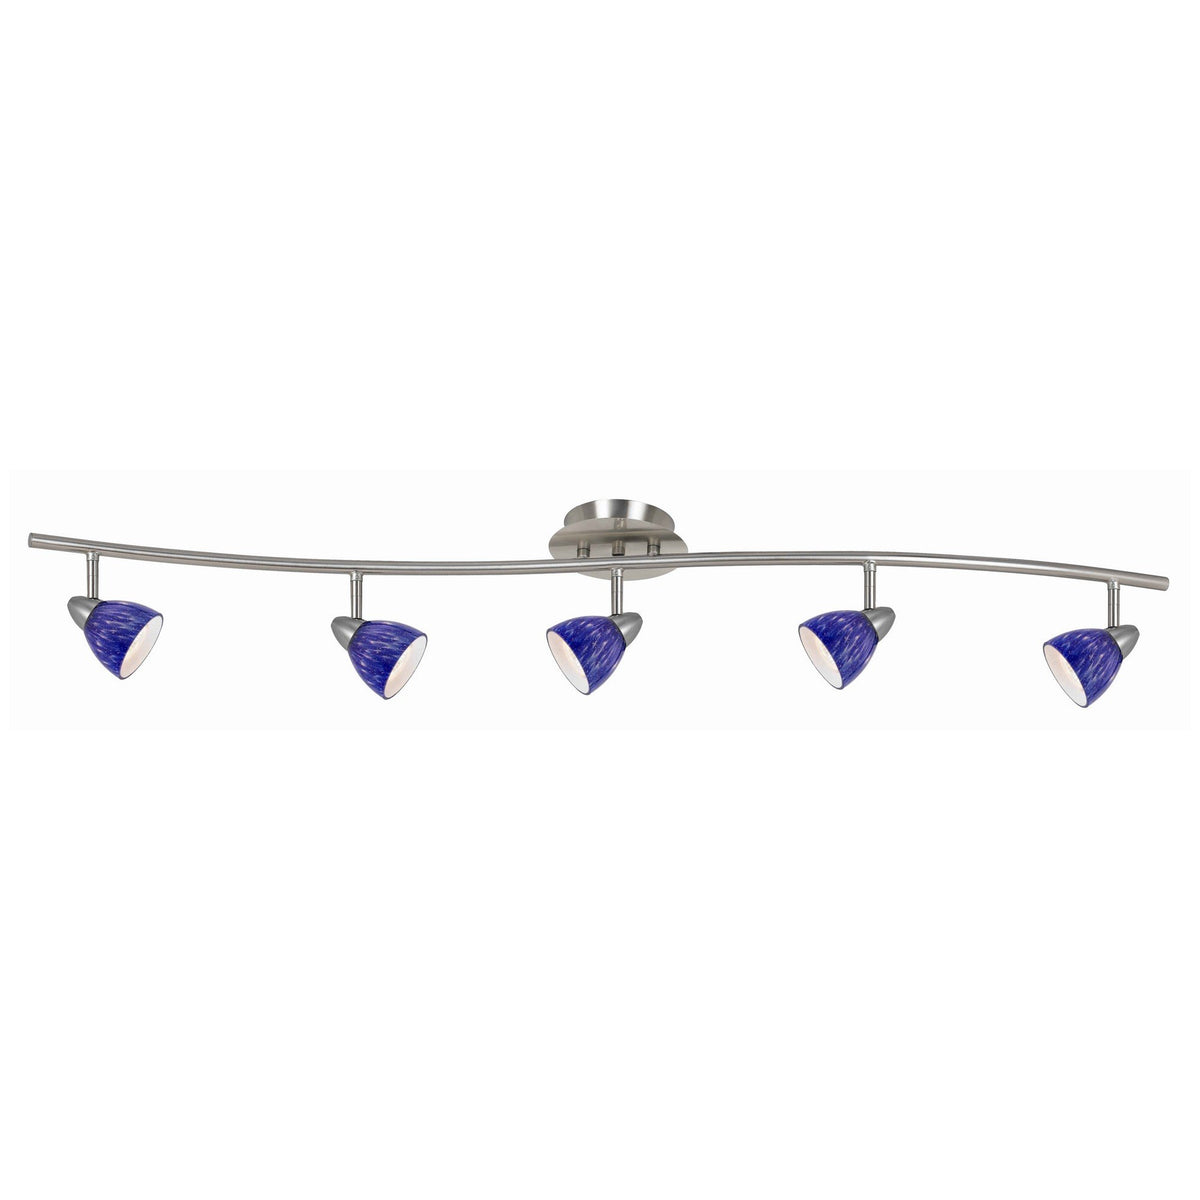 5 Light 120V Metal Track Light Fixture with Textured Shade, Silver and Blue - BM225637